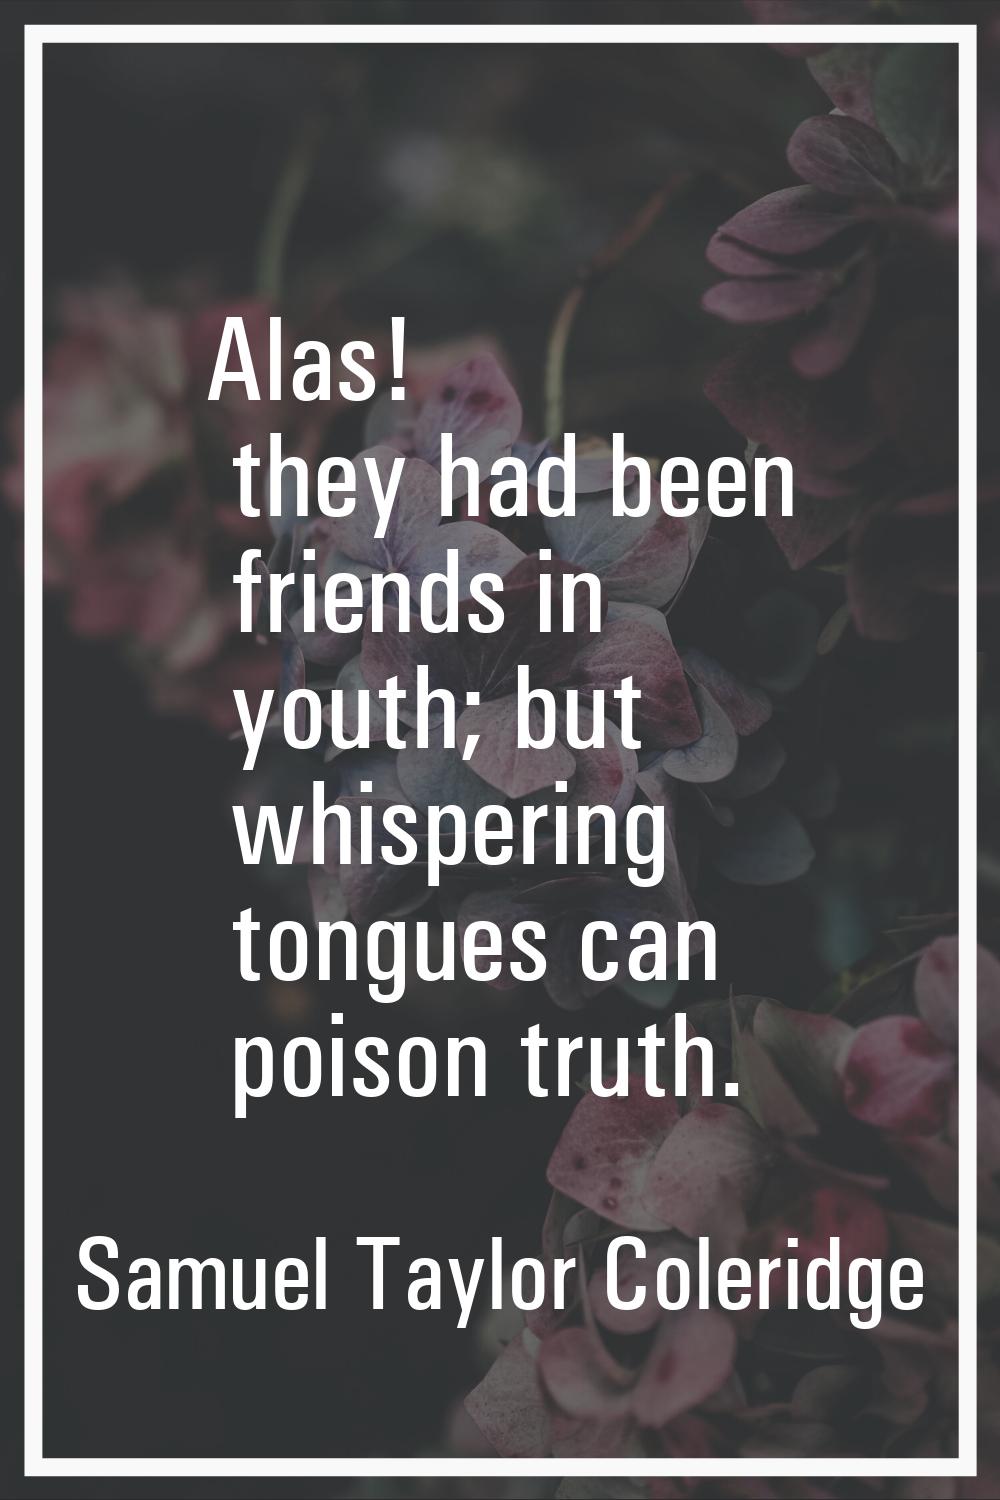 Alas! they had been friends in youth; but whispering tongues can poison truth.